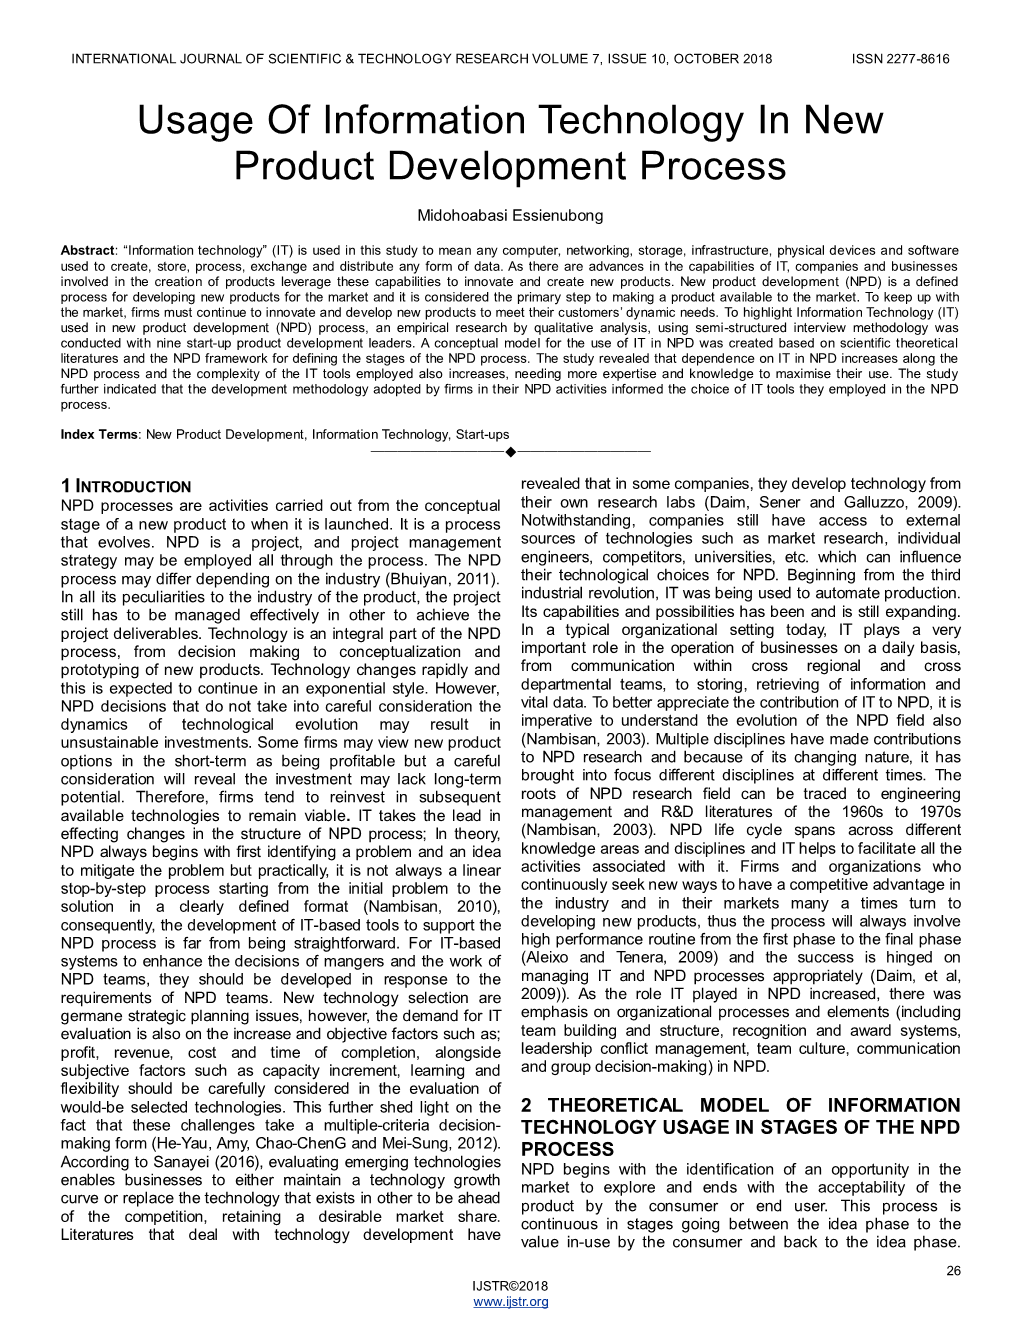 Usage of Information Technology in New Product Development Process